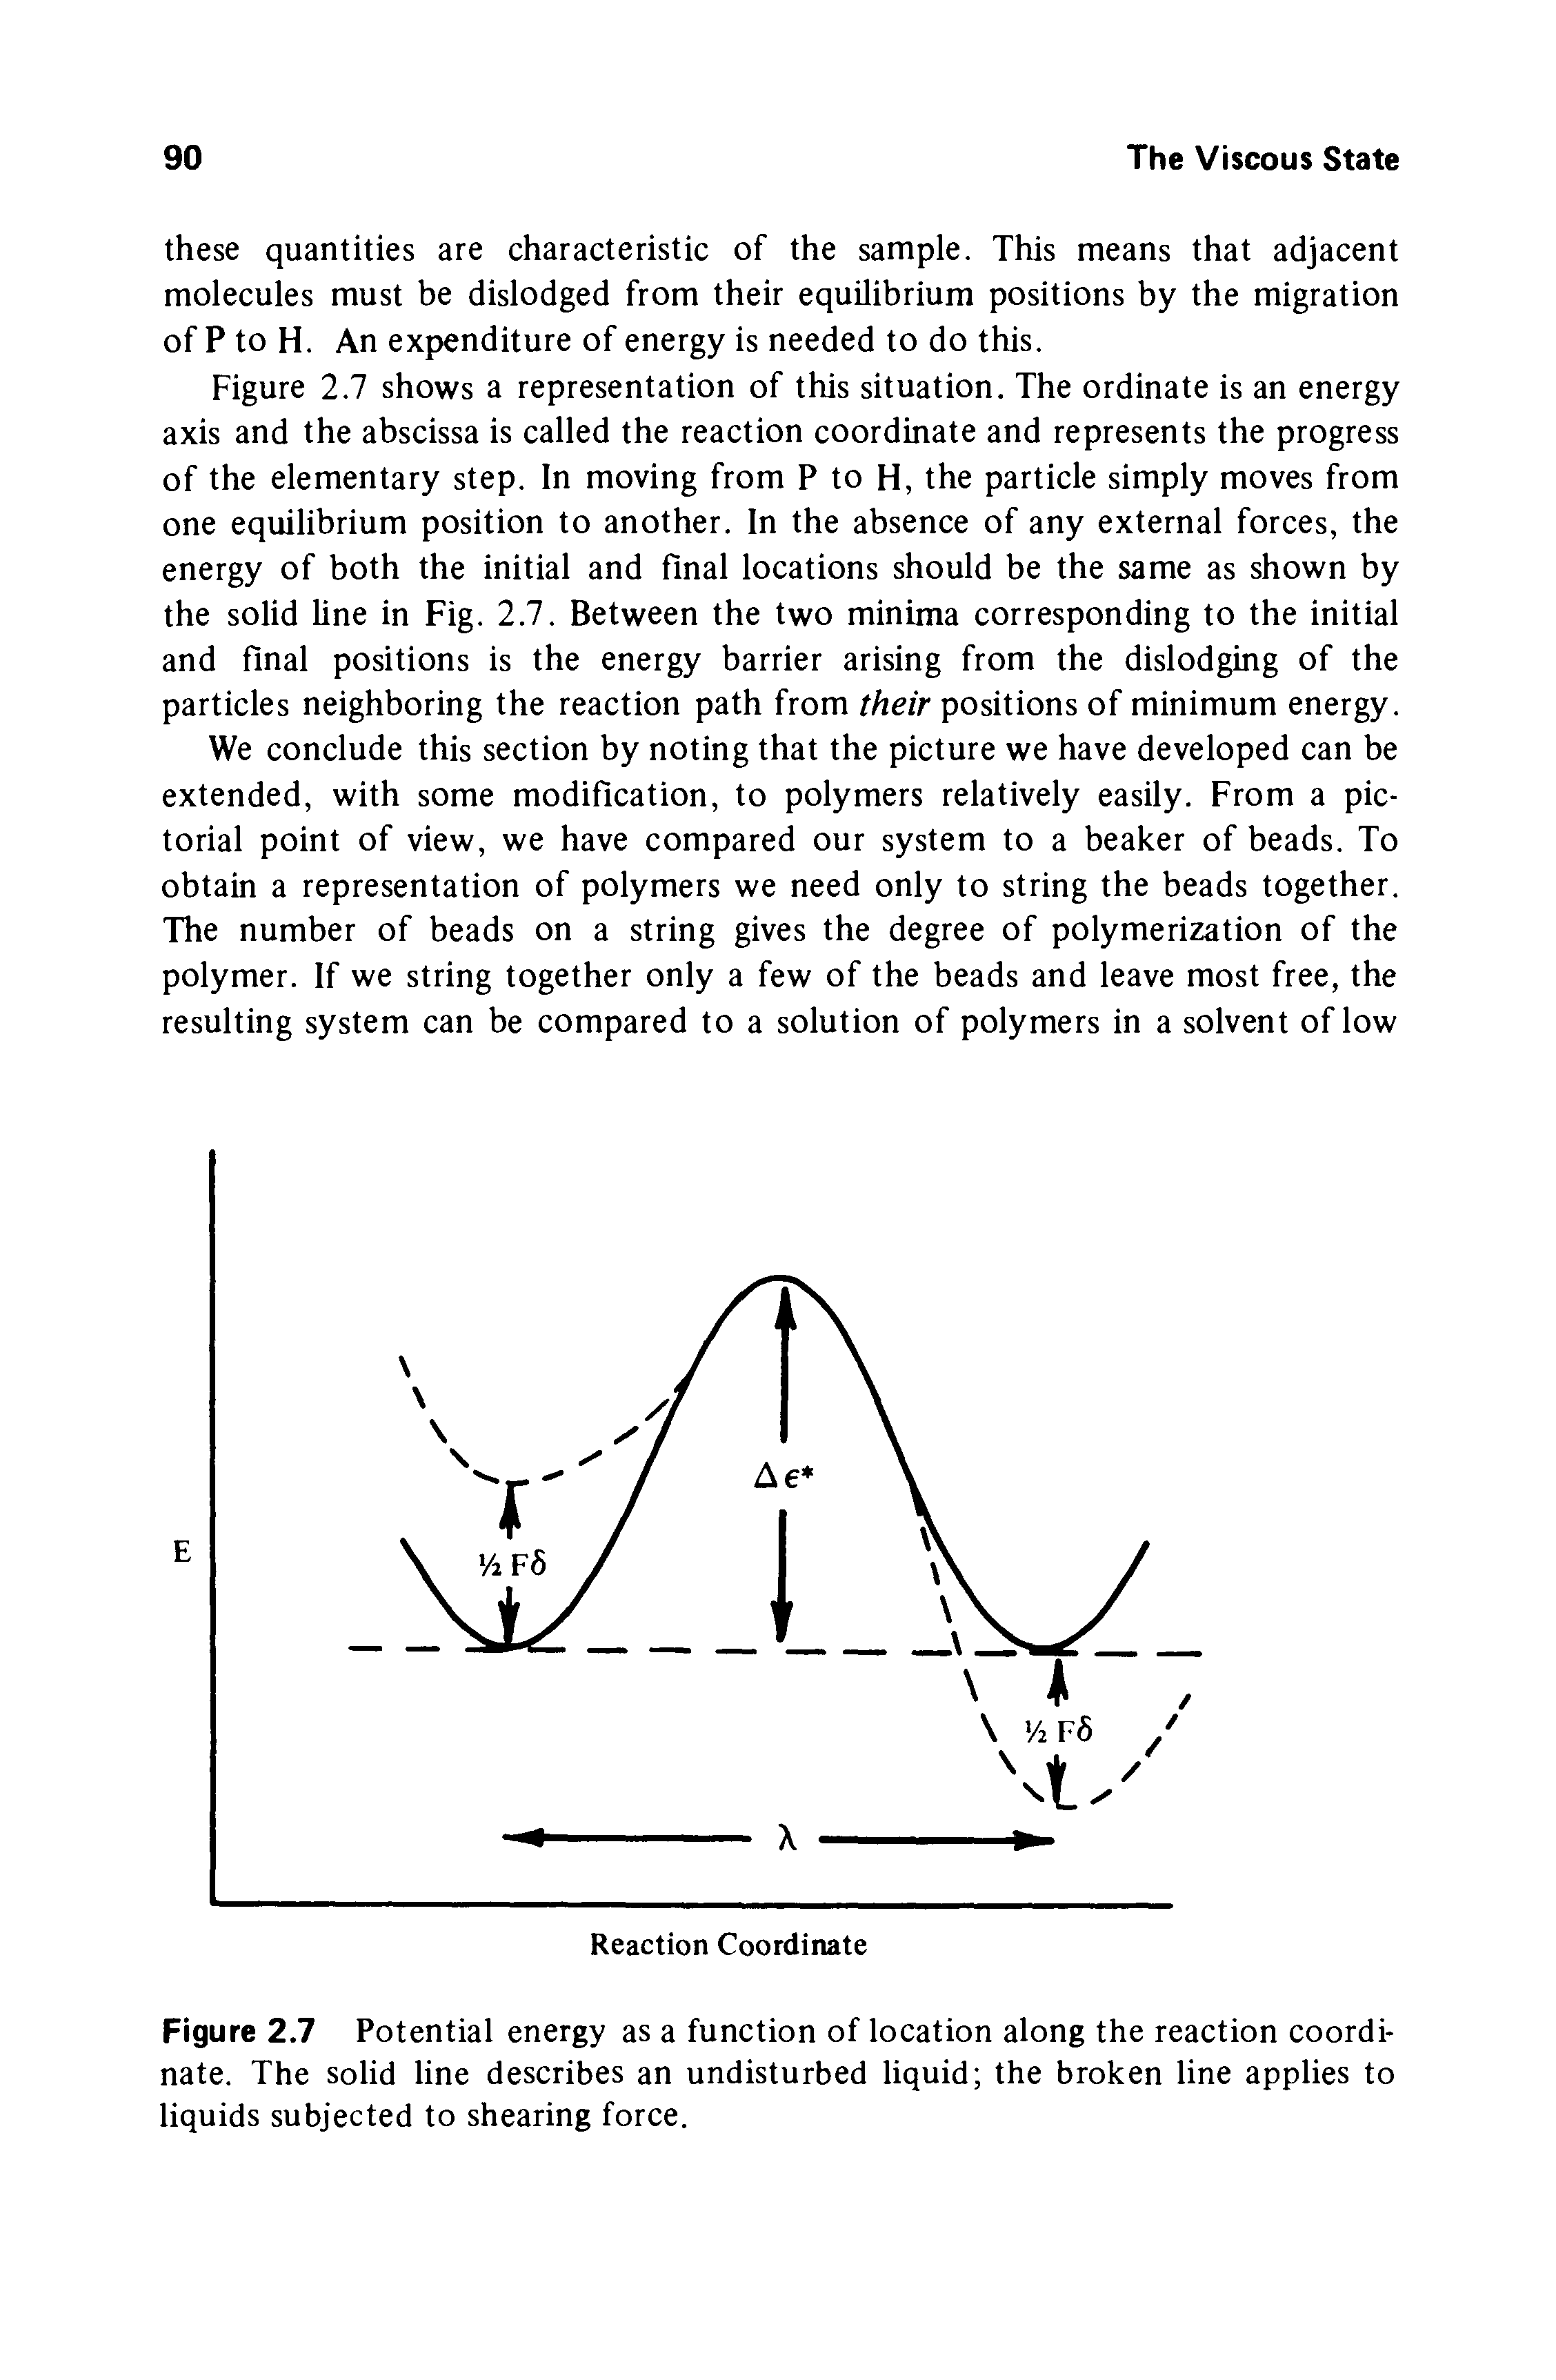 Figure 2.7 Potential energy as a function of location along the reaction coordinate. The solid line describes an undisturbed liquid the broken line applies to liquids subjected to shearing force.